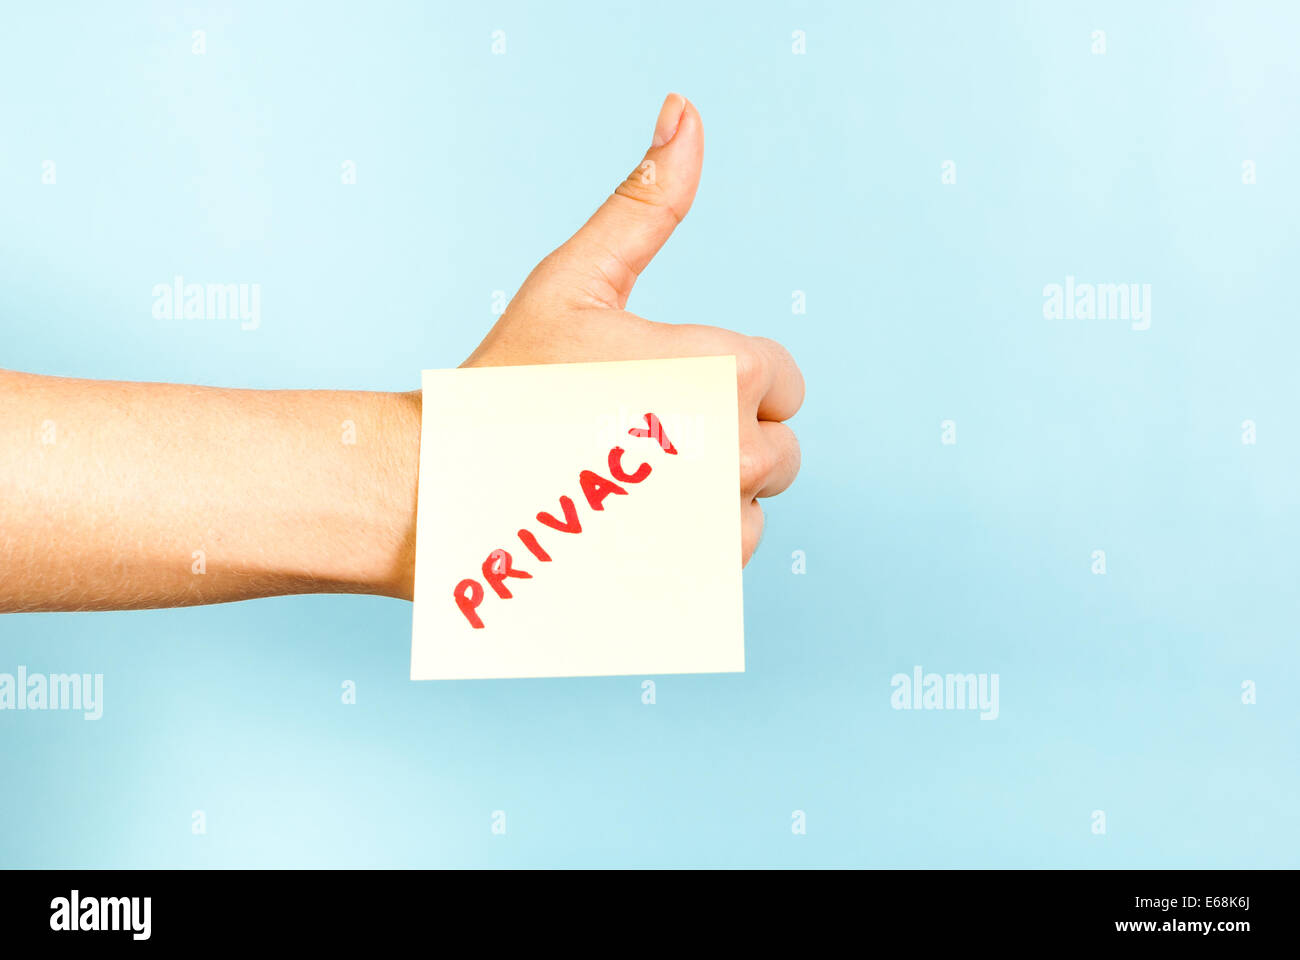 Privacy online. Hand making thumb up gesture con privacy message on note. Stock Photo